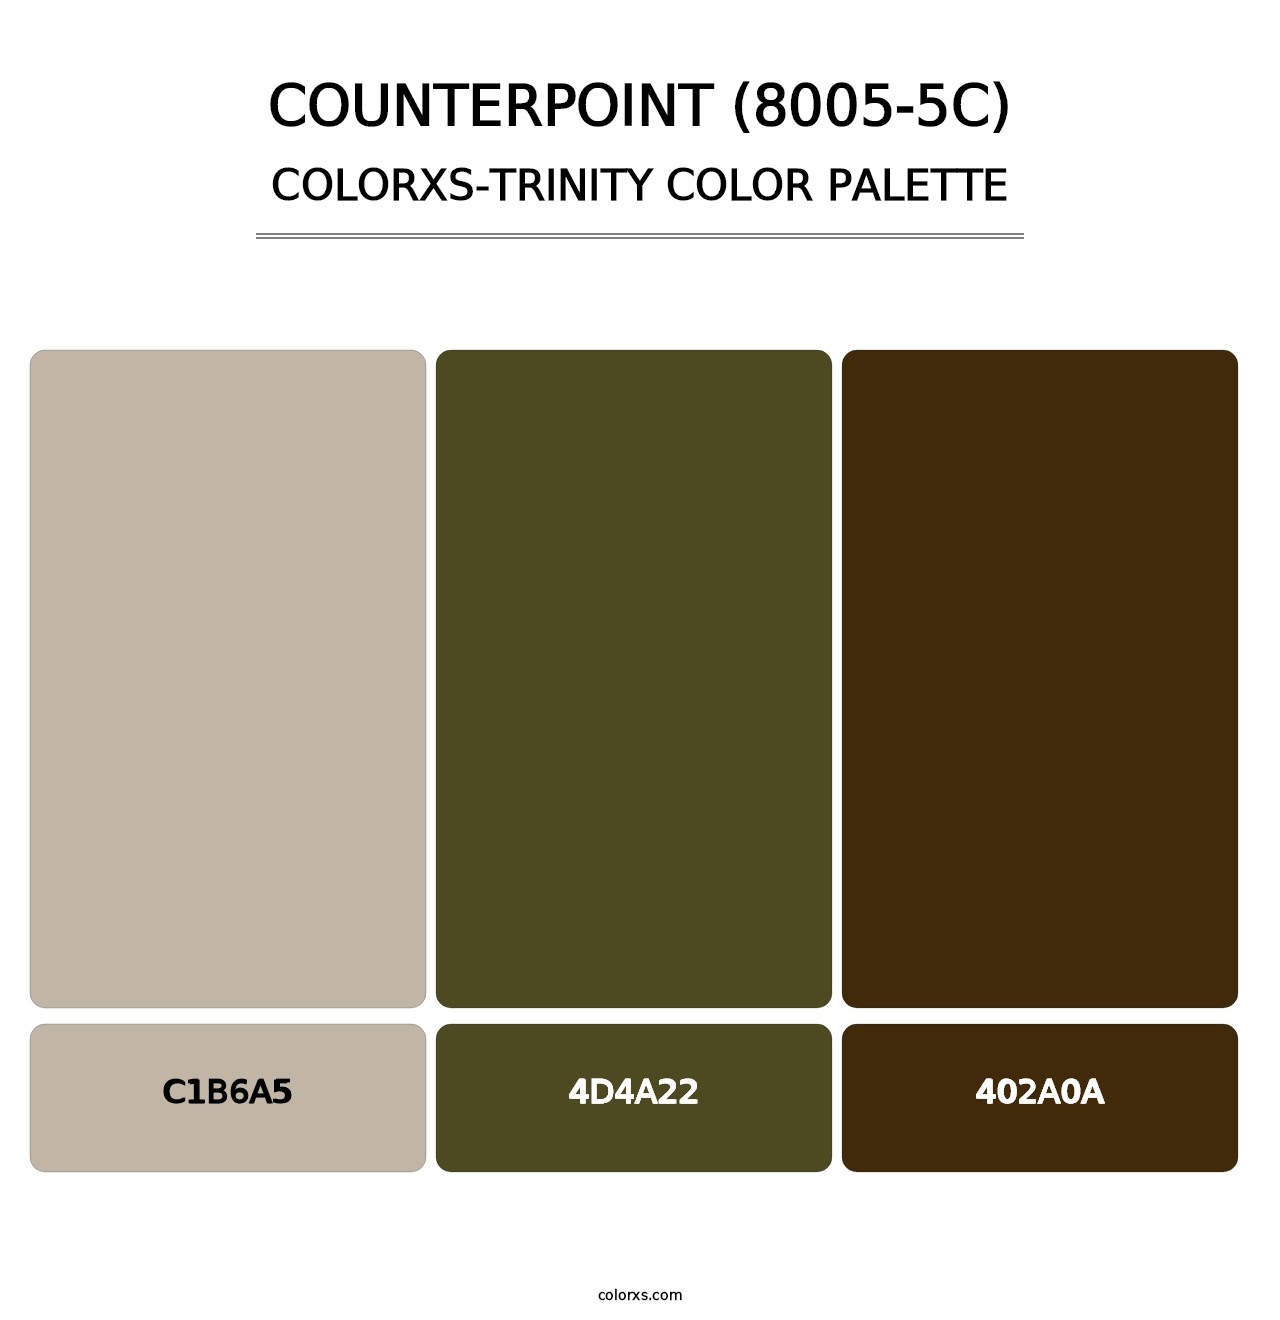 Counterpoint (8005-5C) - Colorxs Trinity Palette